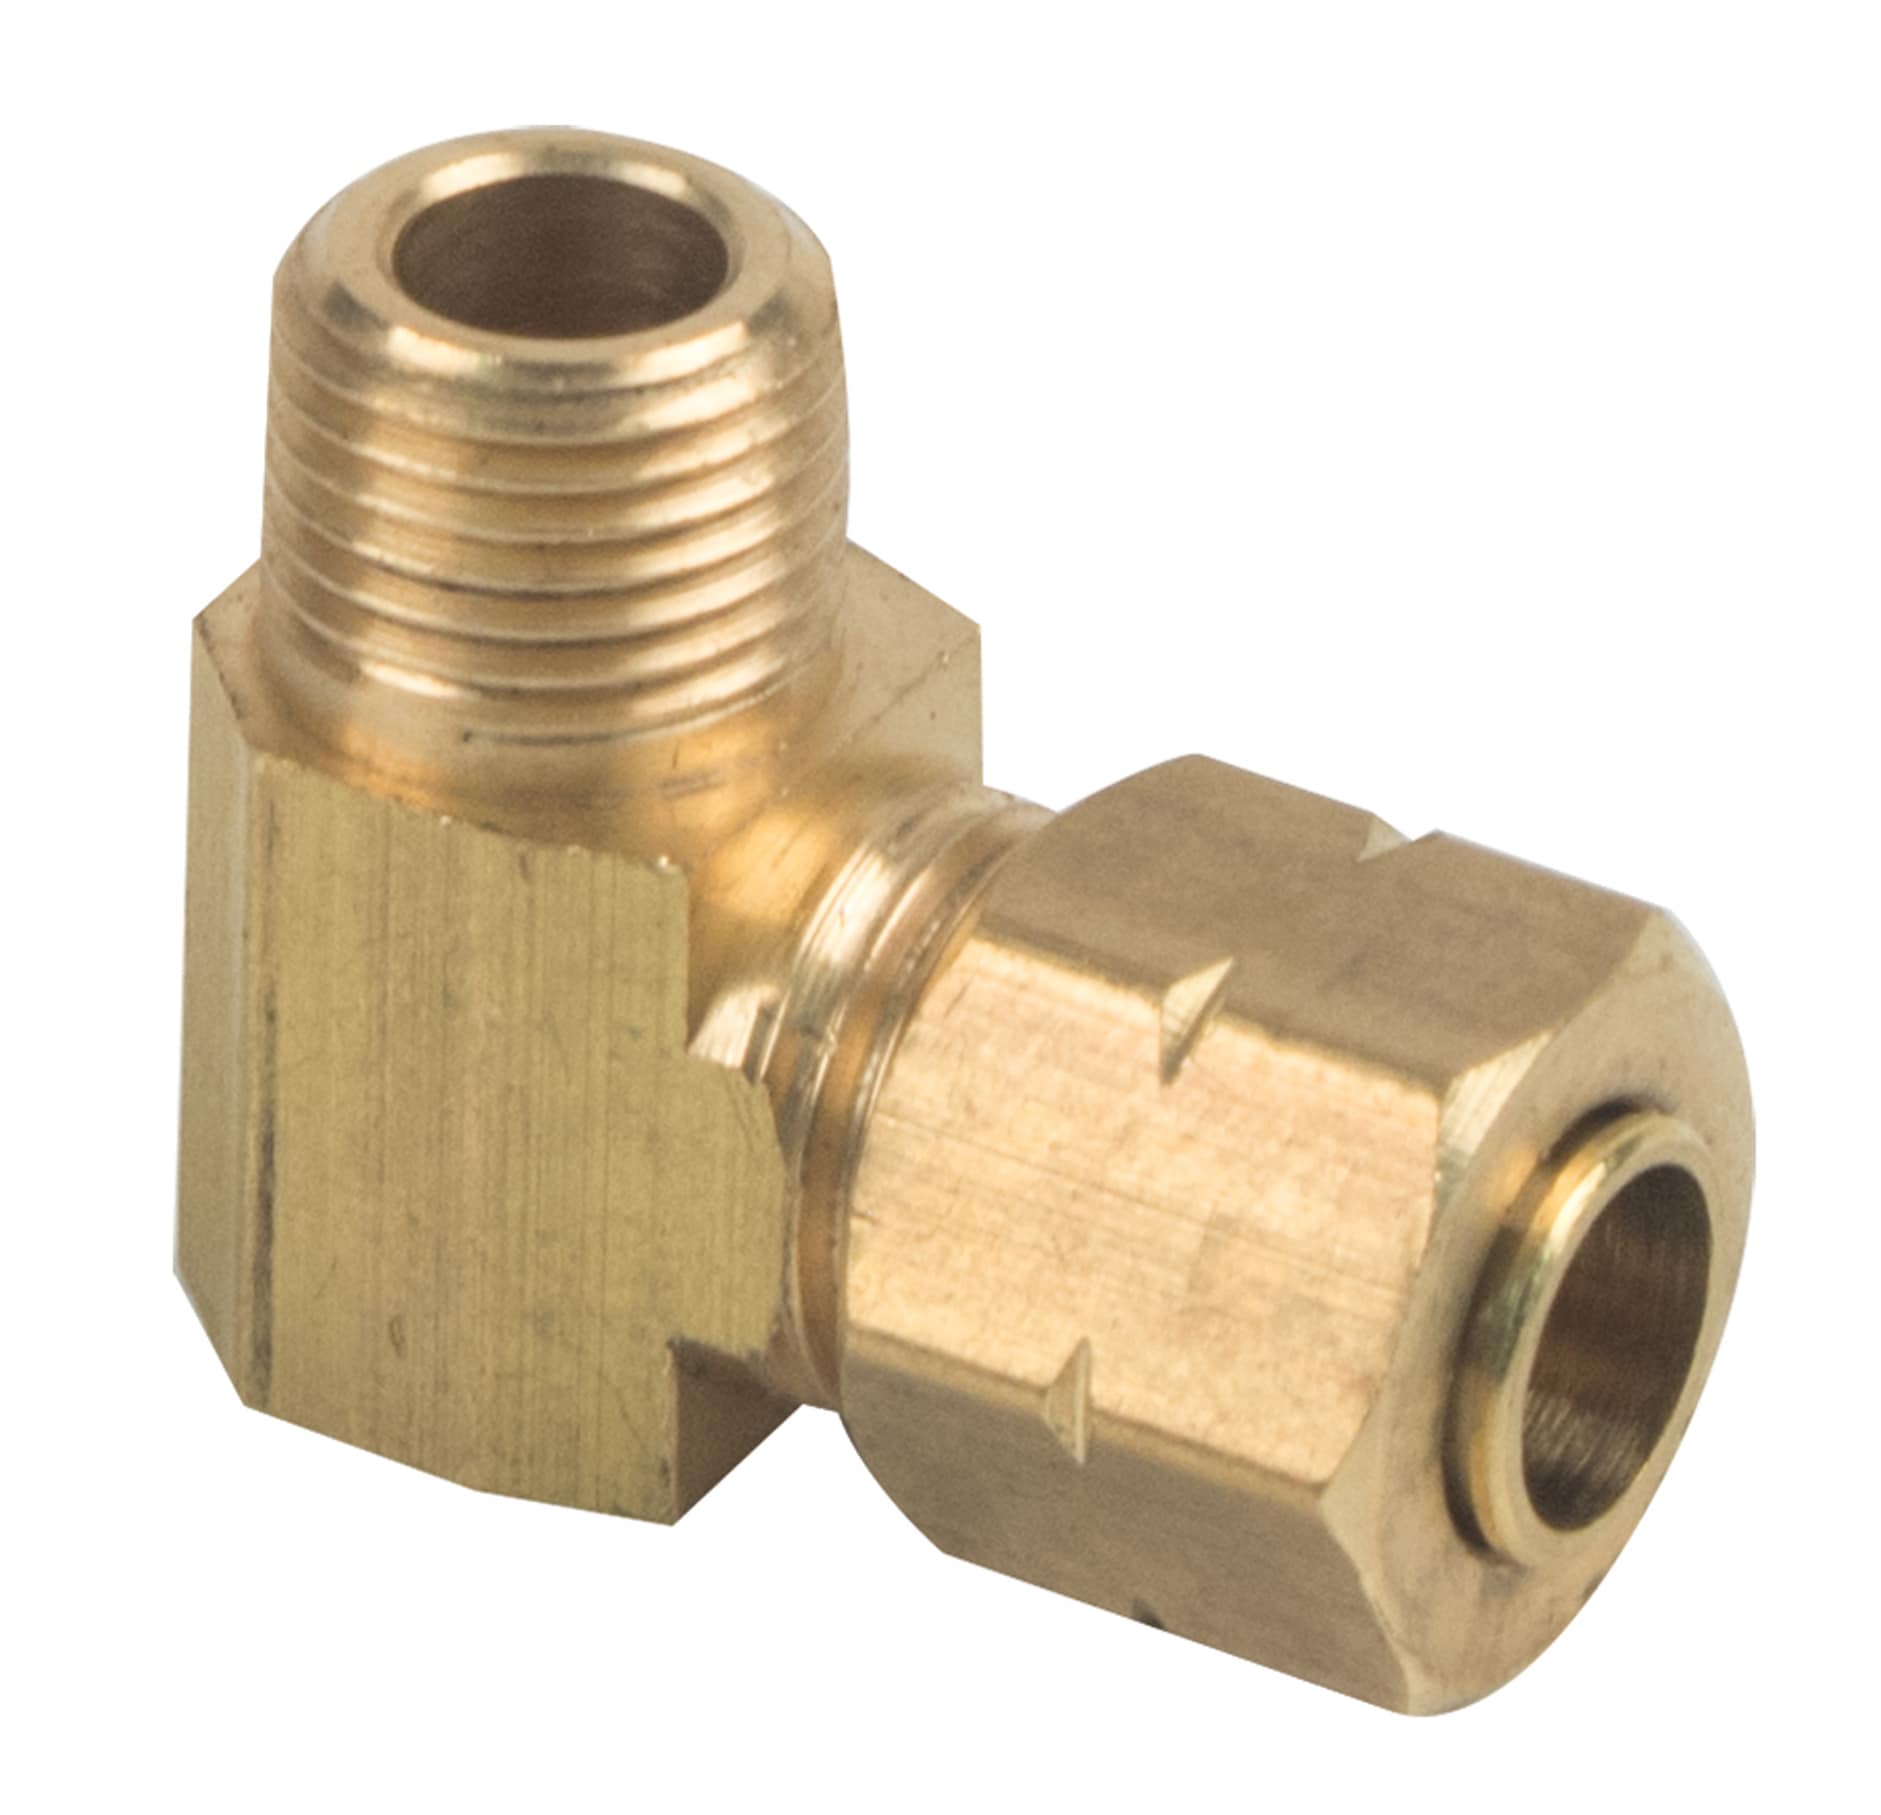 BrassCraft 1/4-in x 1/8-in Compression Elbow Fitting in the Brass